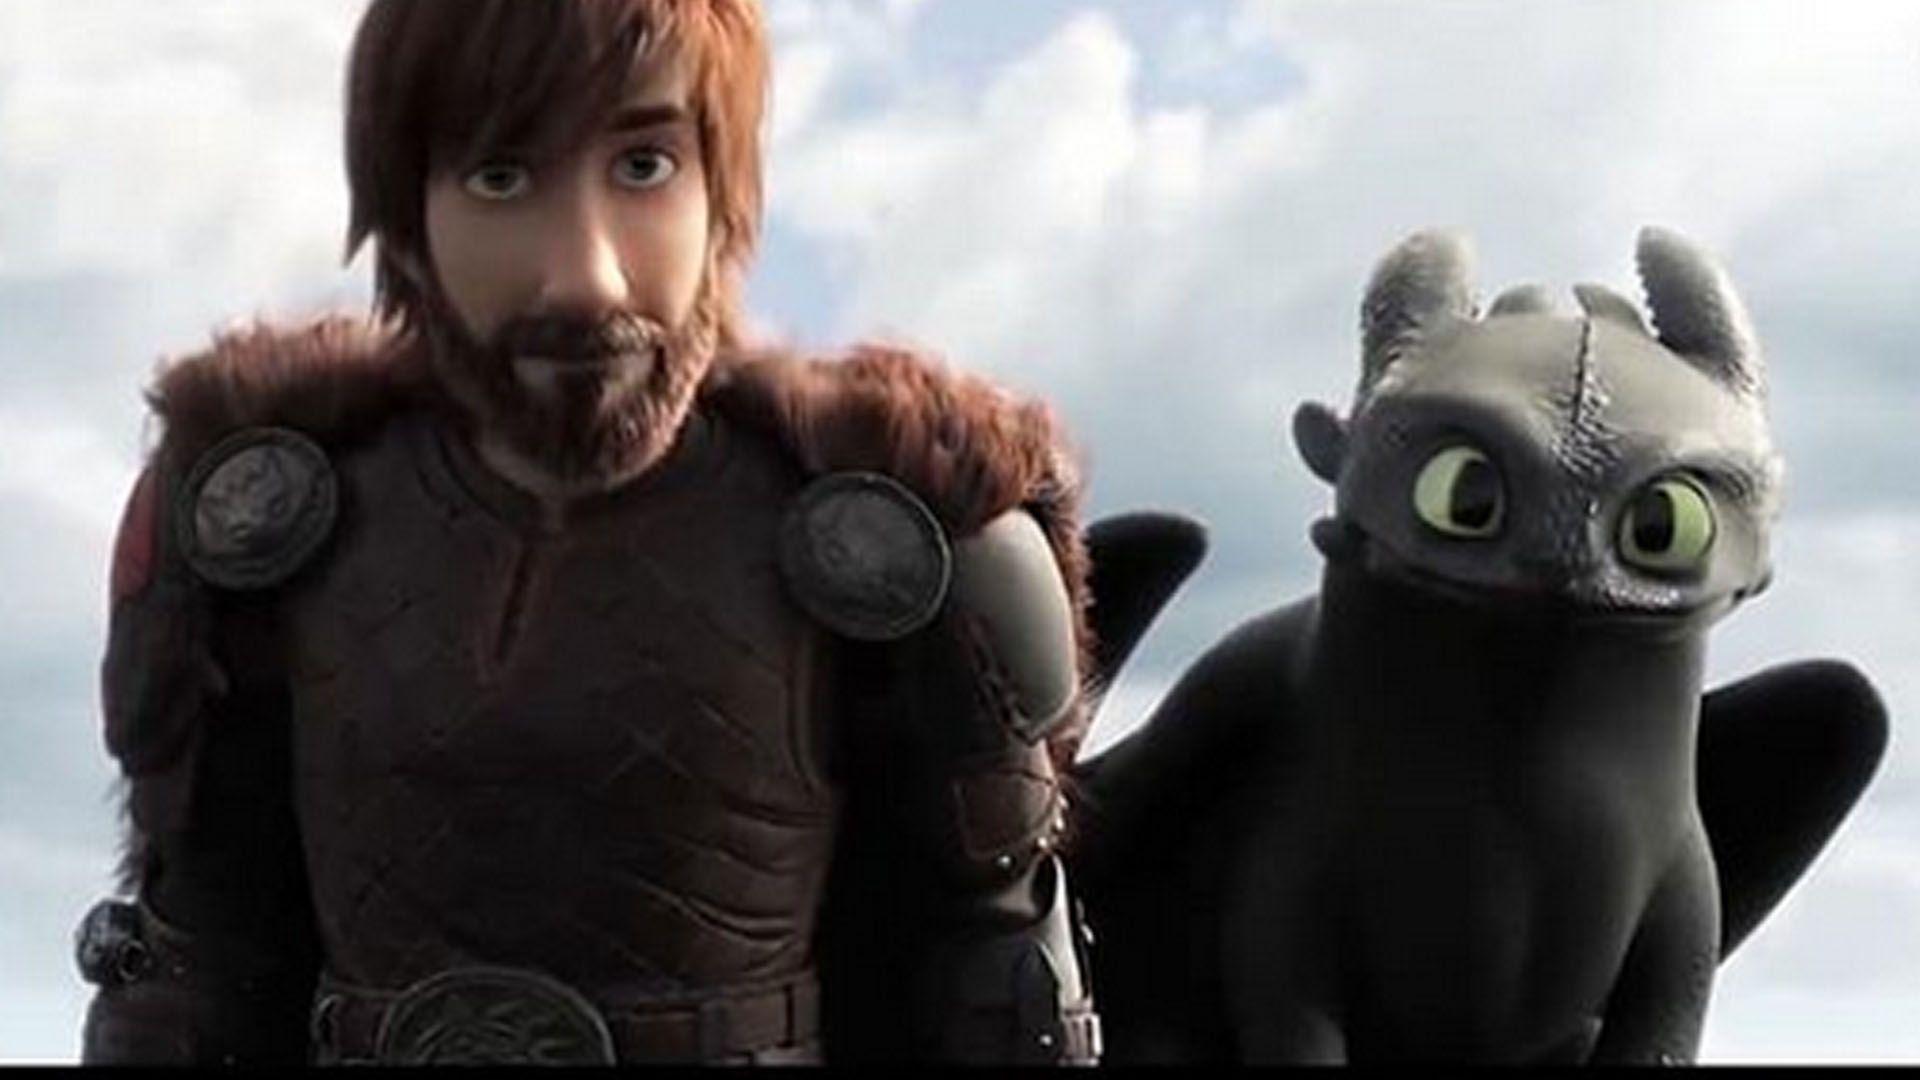 Epic Tale Soars In “How To Train Your Dragon 3′